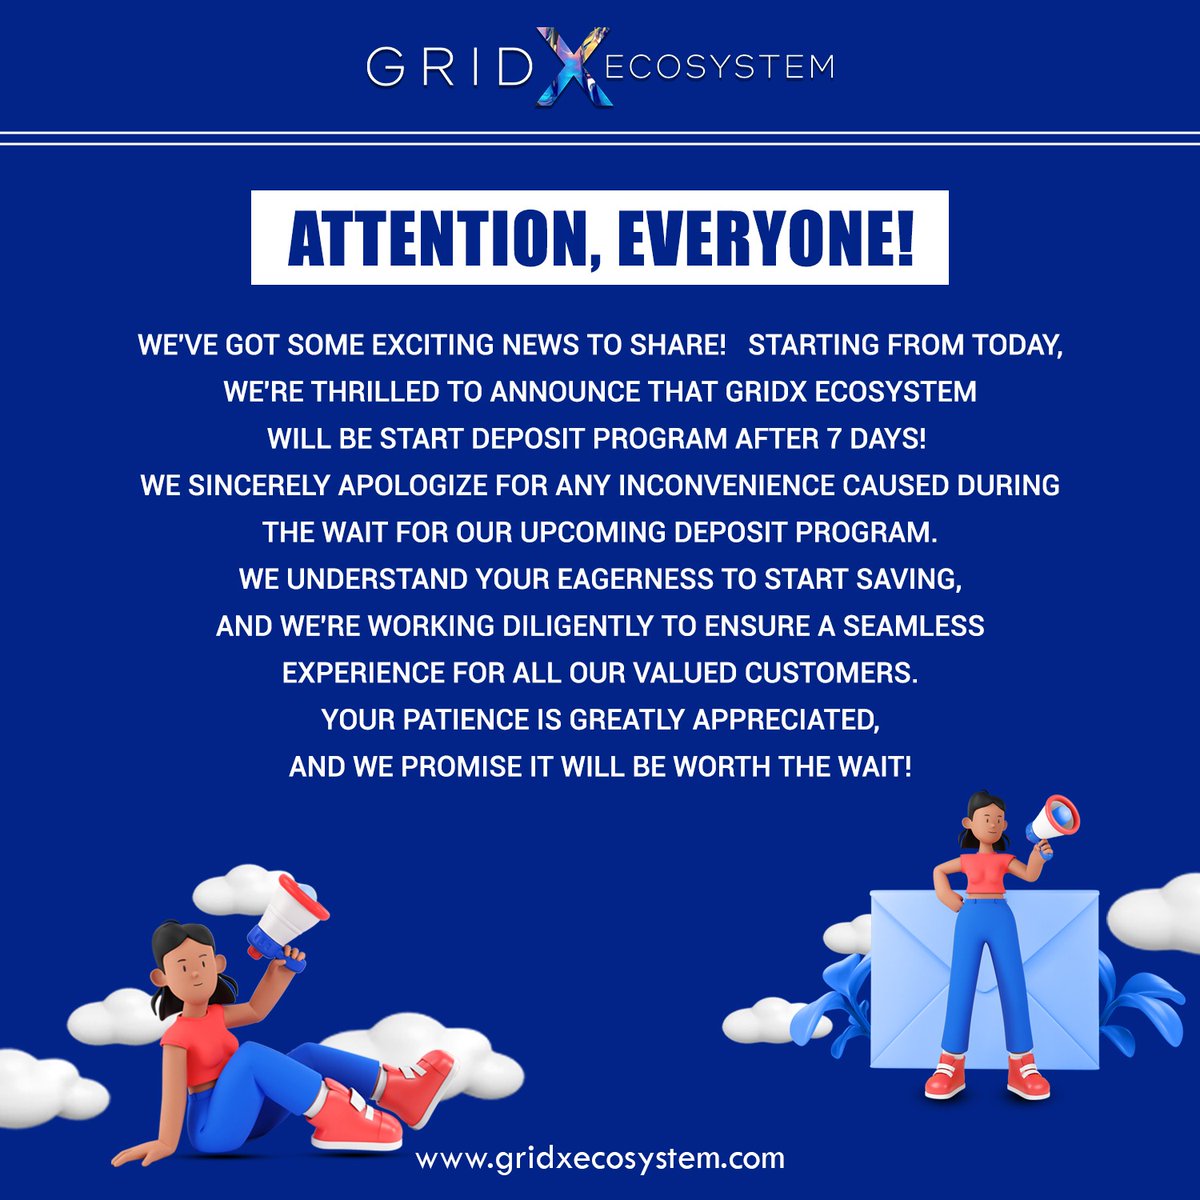 GridX Ecosystem is thrilled to announce our much-awaited START DEPOSIT PROGRAM! 🎉 After just 7 days, you can finally jump into the world of savings and financial growth with us! 
#GridXEcosystem #StartDepositProgram  #FinancialGrowth #SavingsOpportunity #Cryptocurrency